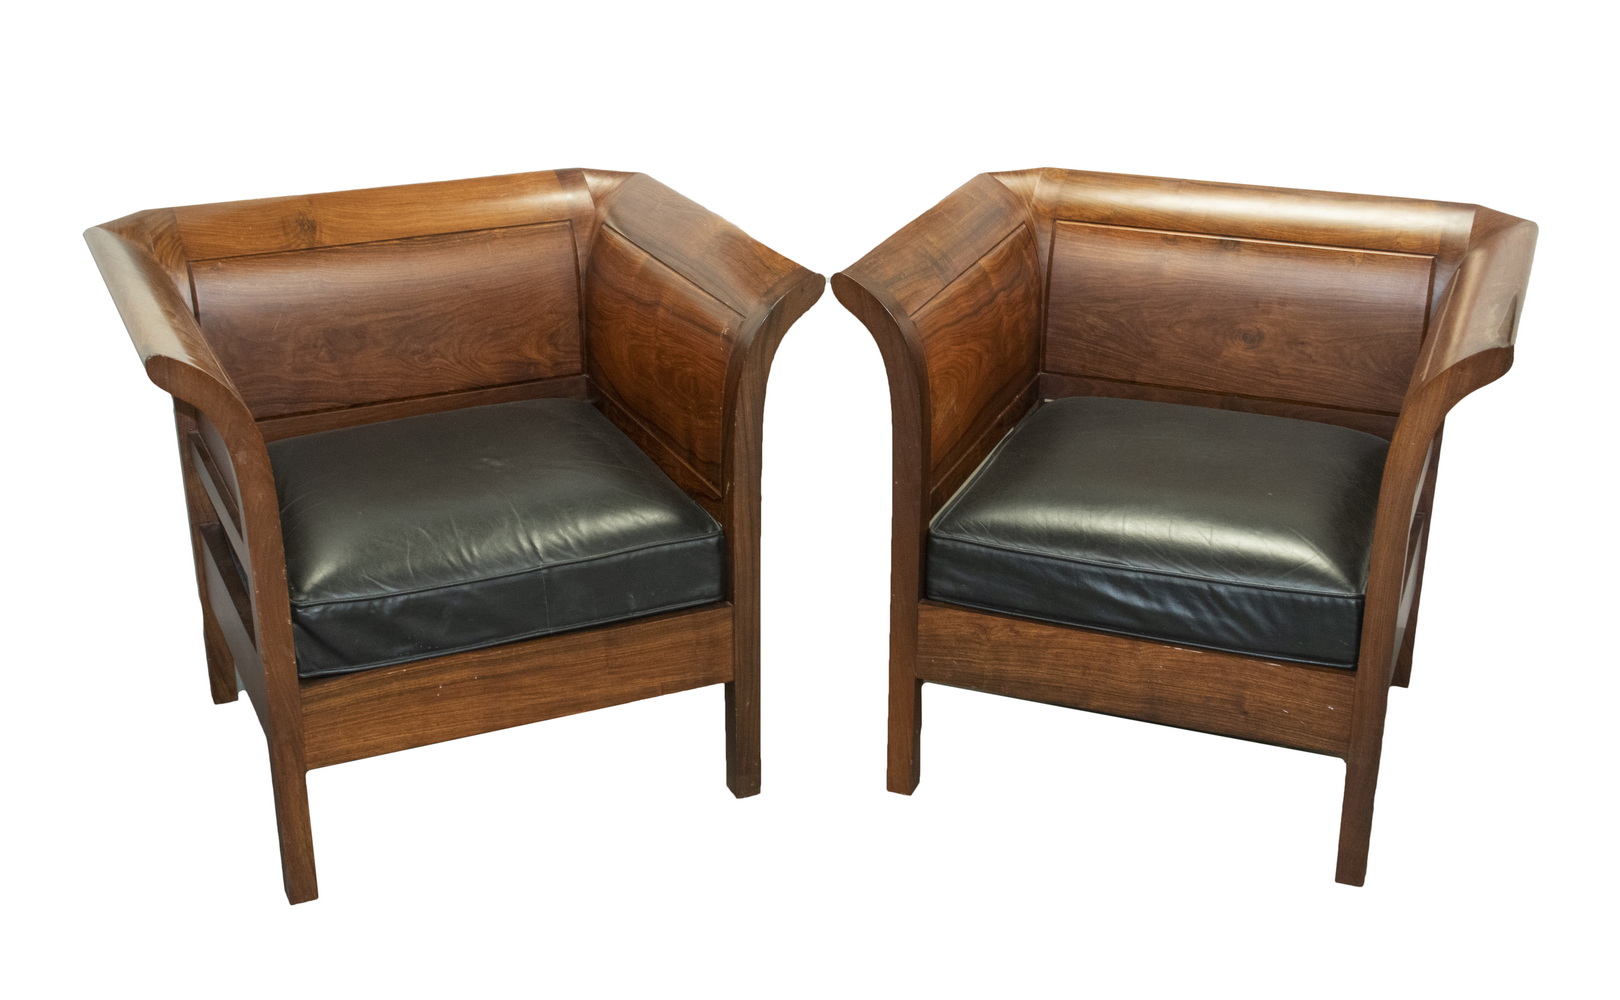 PR ROSEWOOD & LEATHER CHAIRS Pair